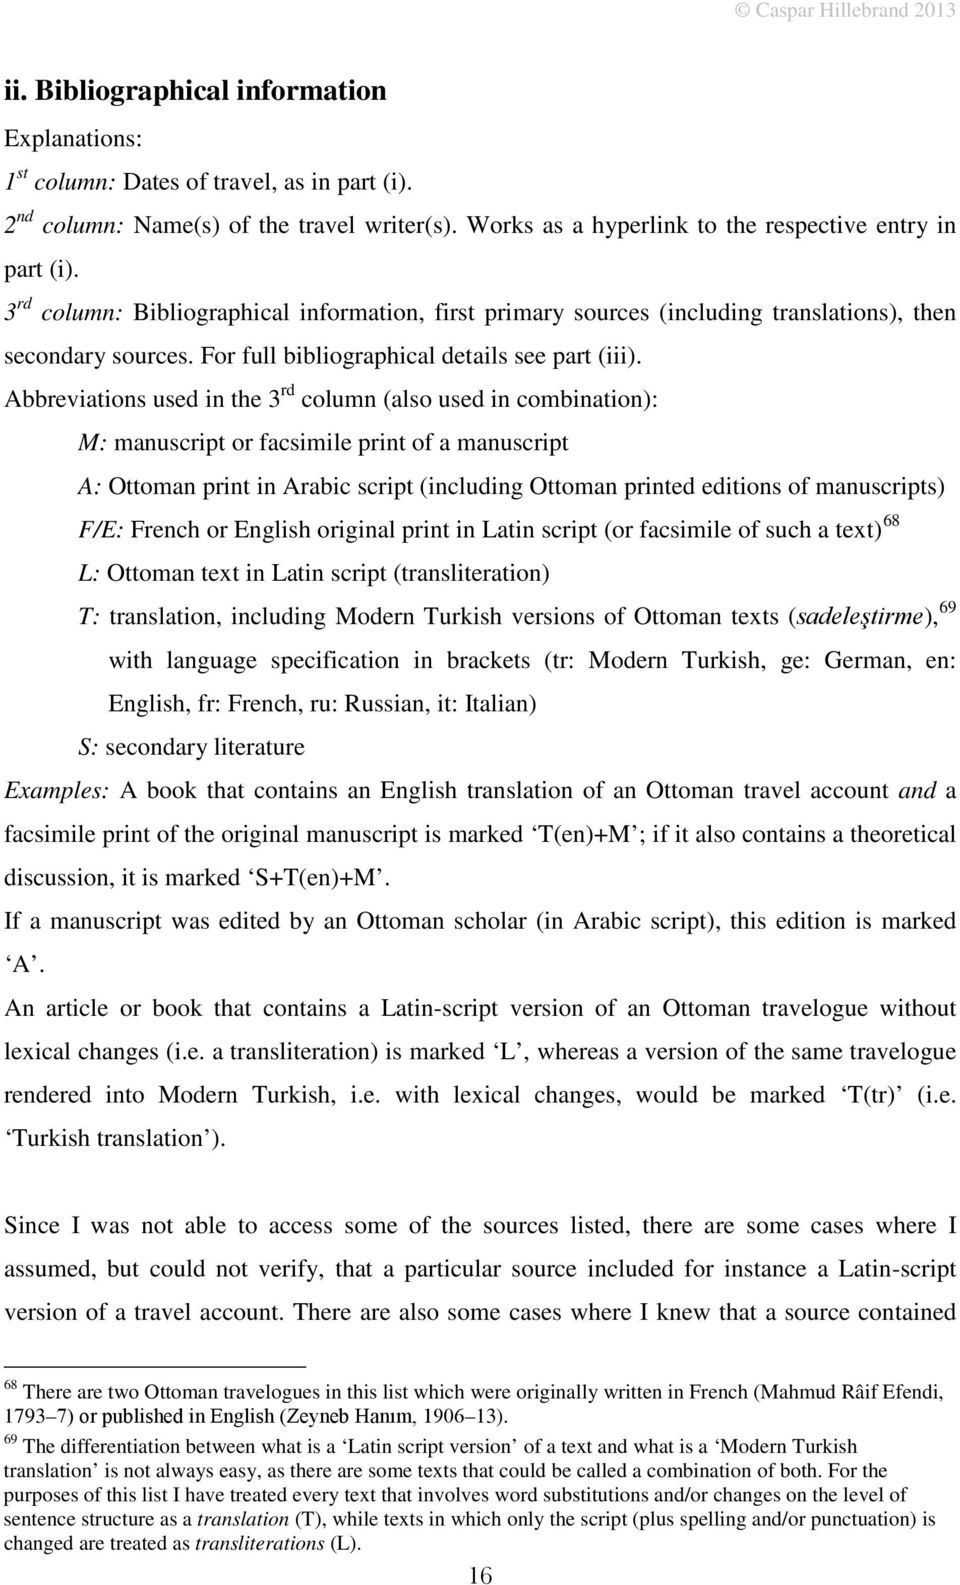 Abbreviations used in the 3 rd column (also used in combination): M: manuscript or facsimile print of a manuscript A: Ottoman print in Arabic script (including Ottoman printed editions of